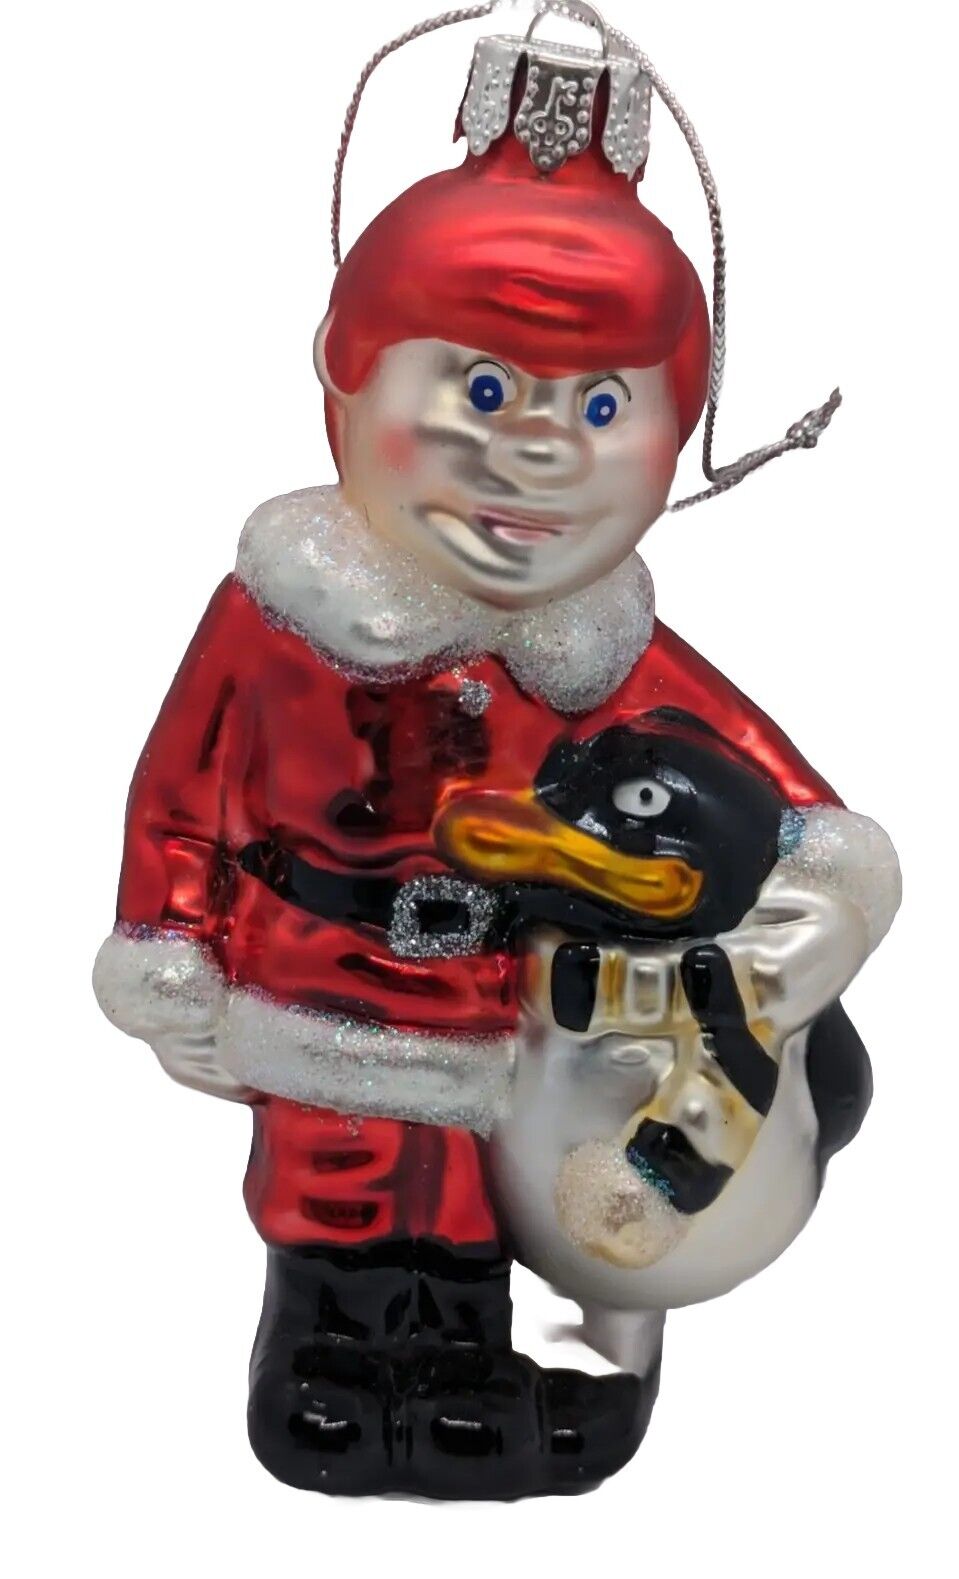 Vntg. Kurt Adler Santa Clause Coming To Town Kris Kringle Handcrafted Glass...